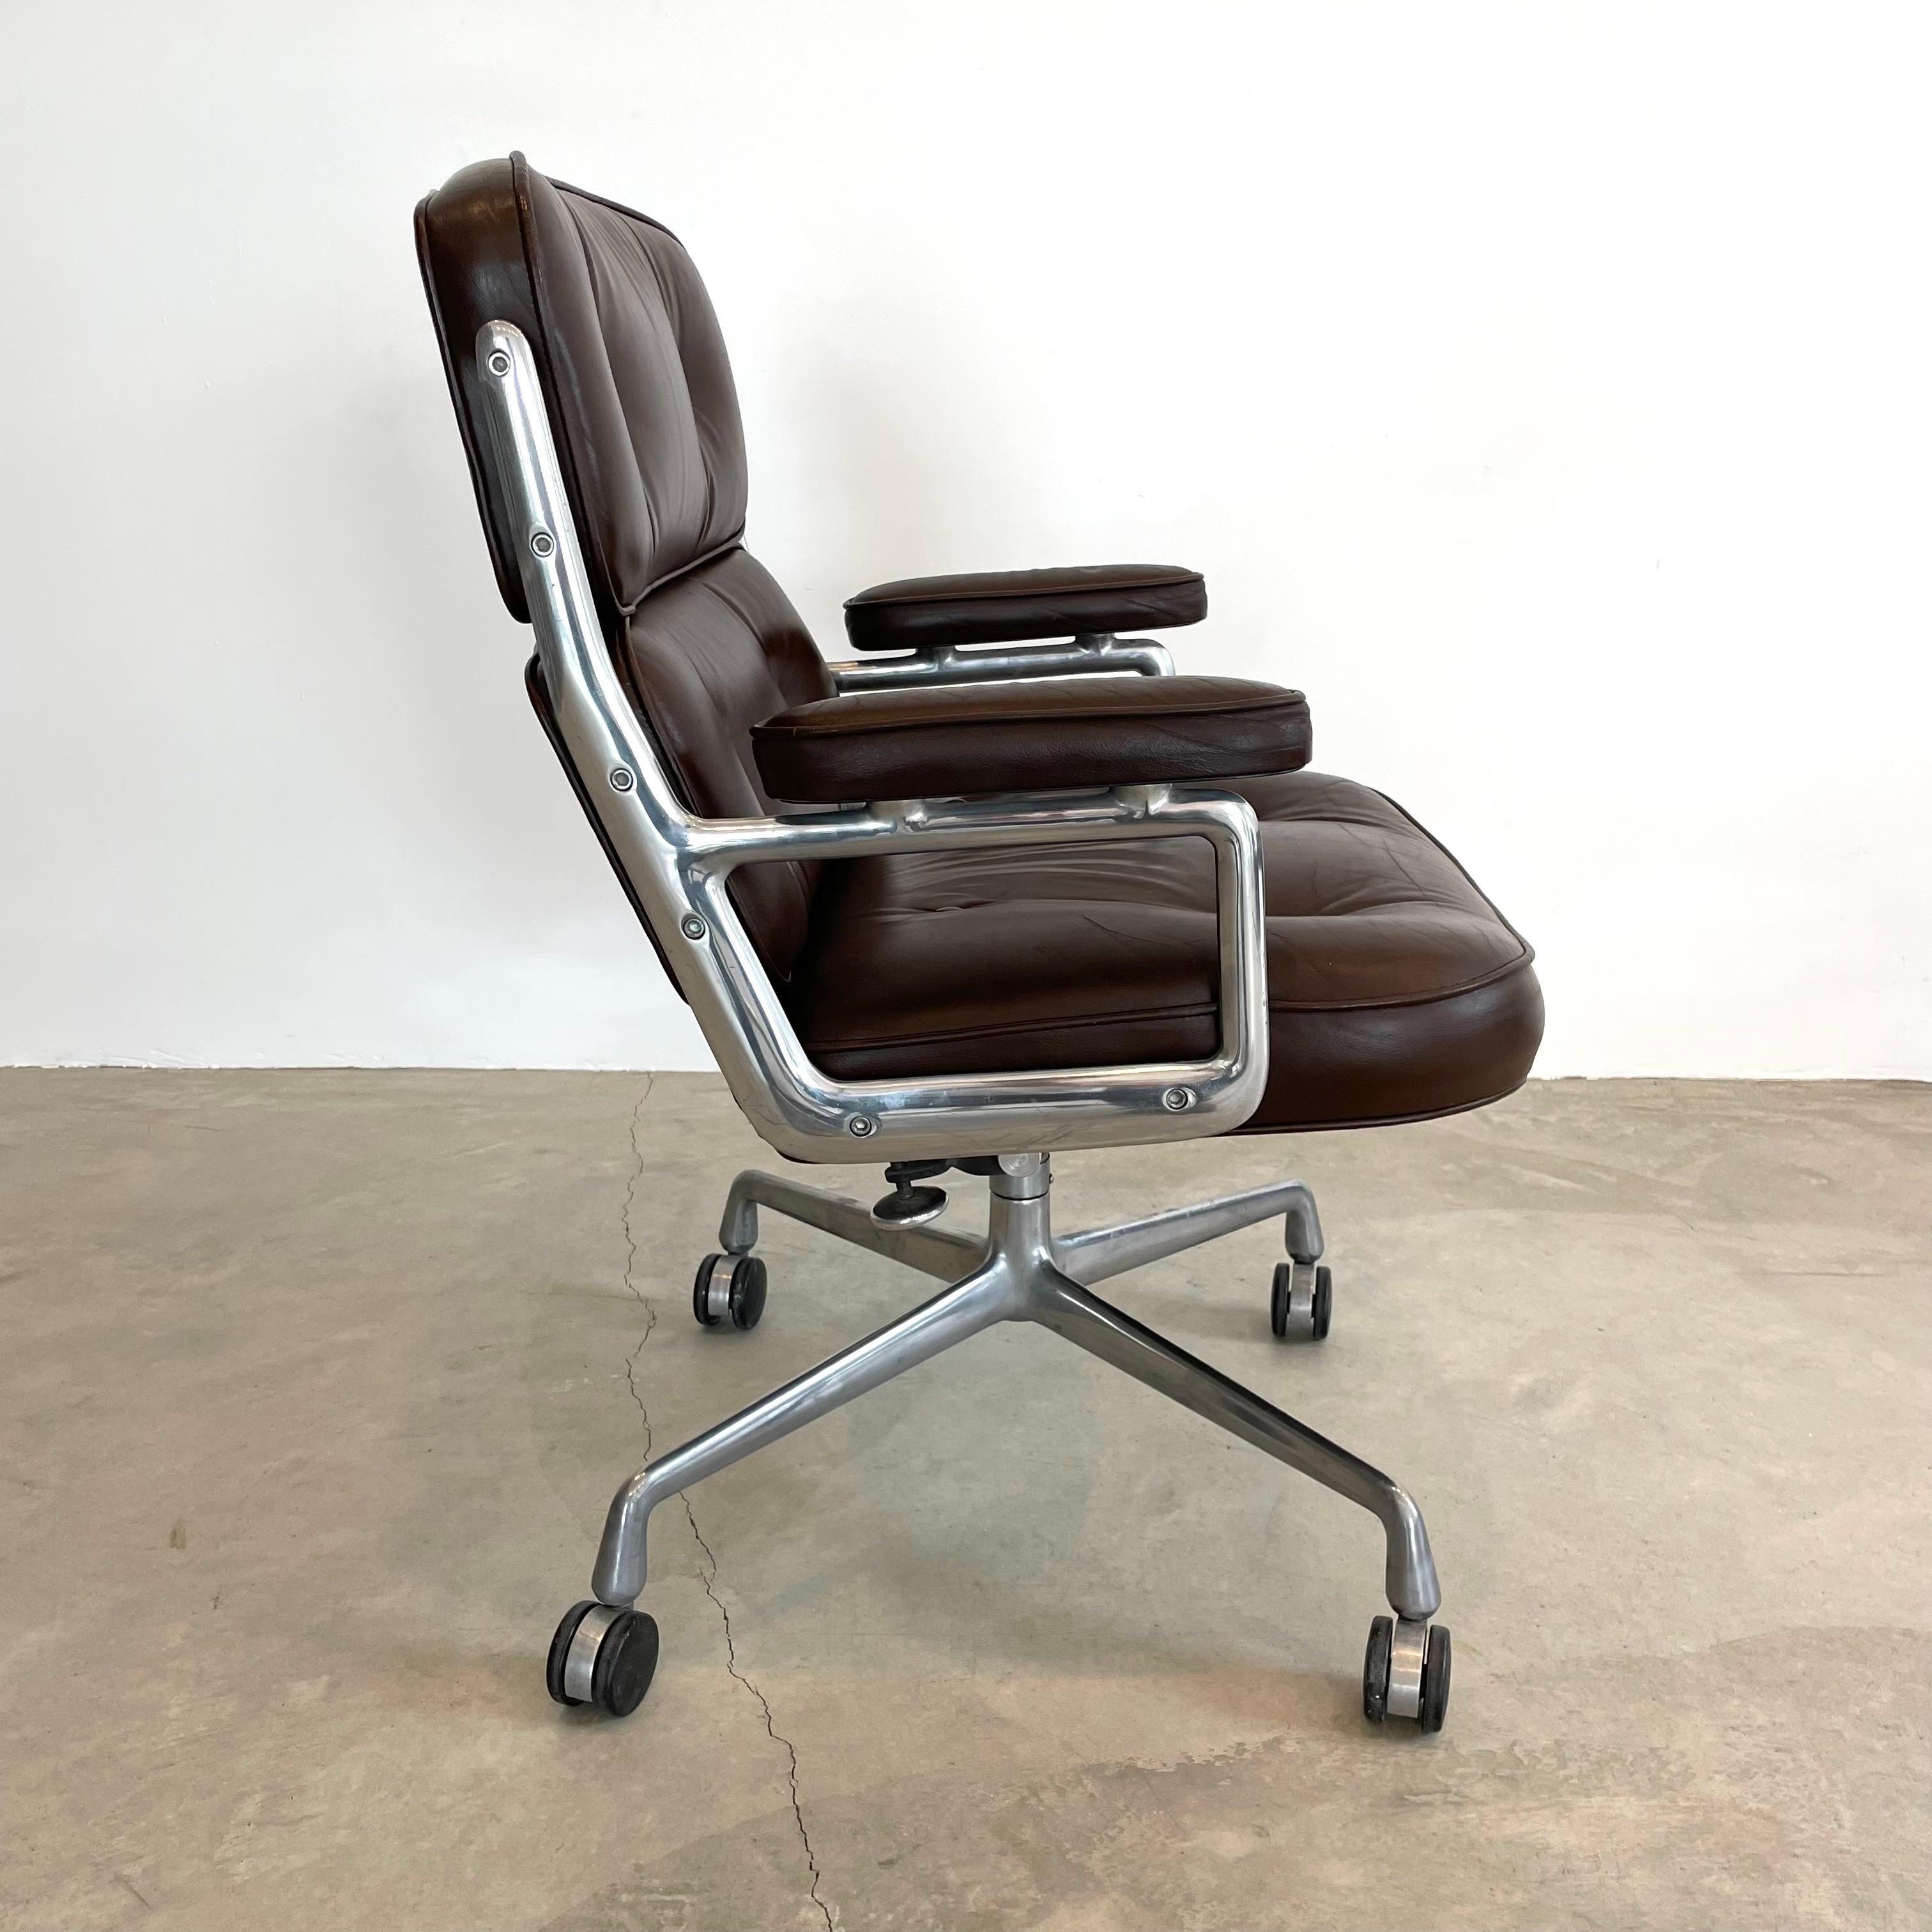 Mid-Century Modern Eames Time Life Chair in Chocolate Leather for Herman Miller, 1978 USA For Sale